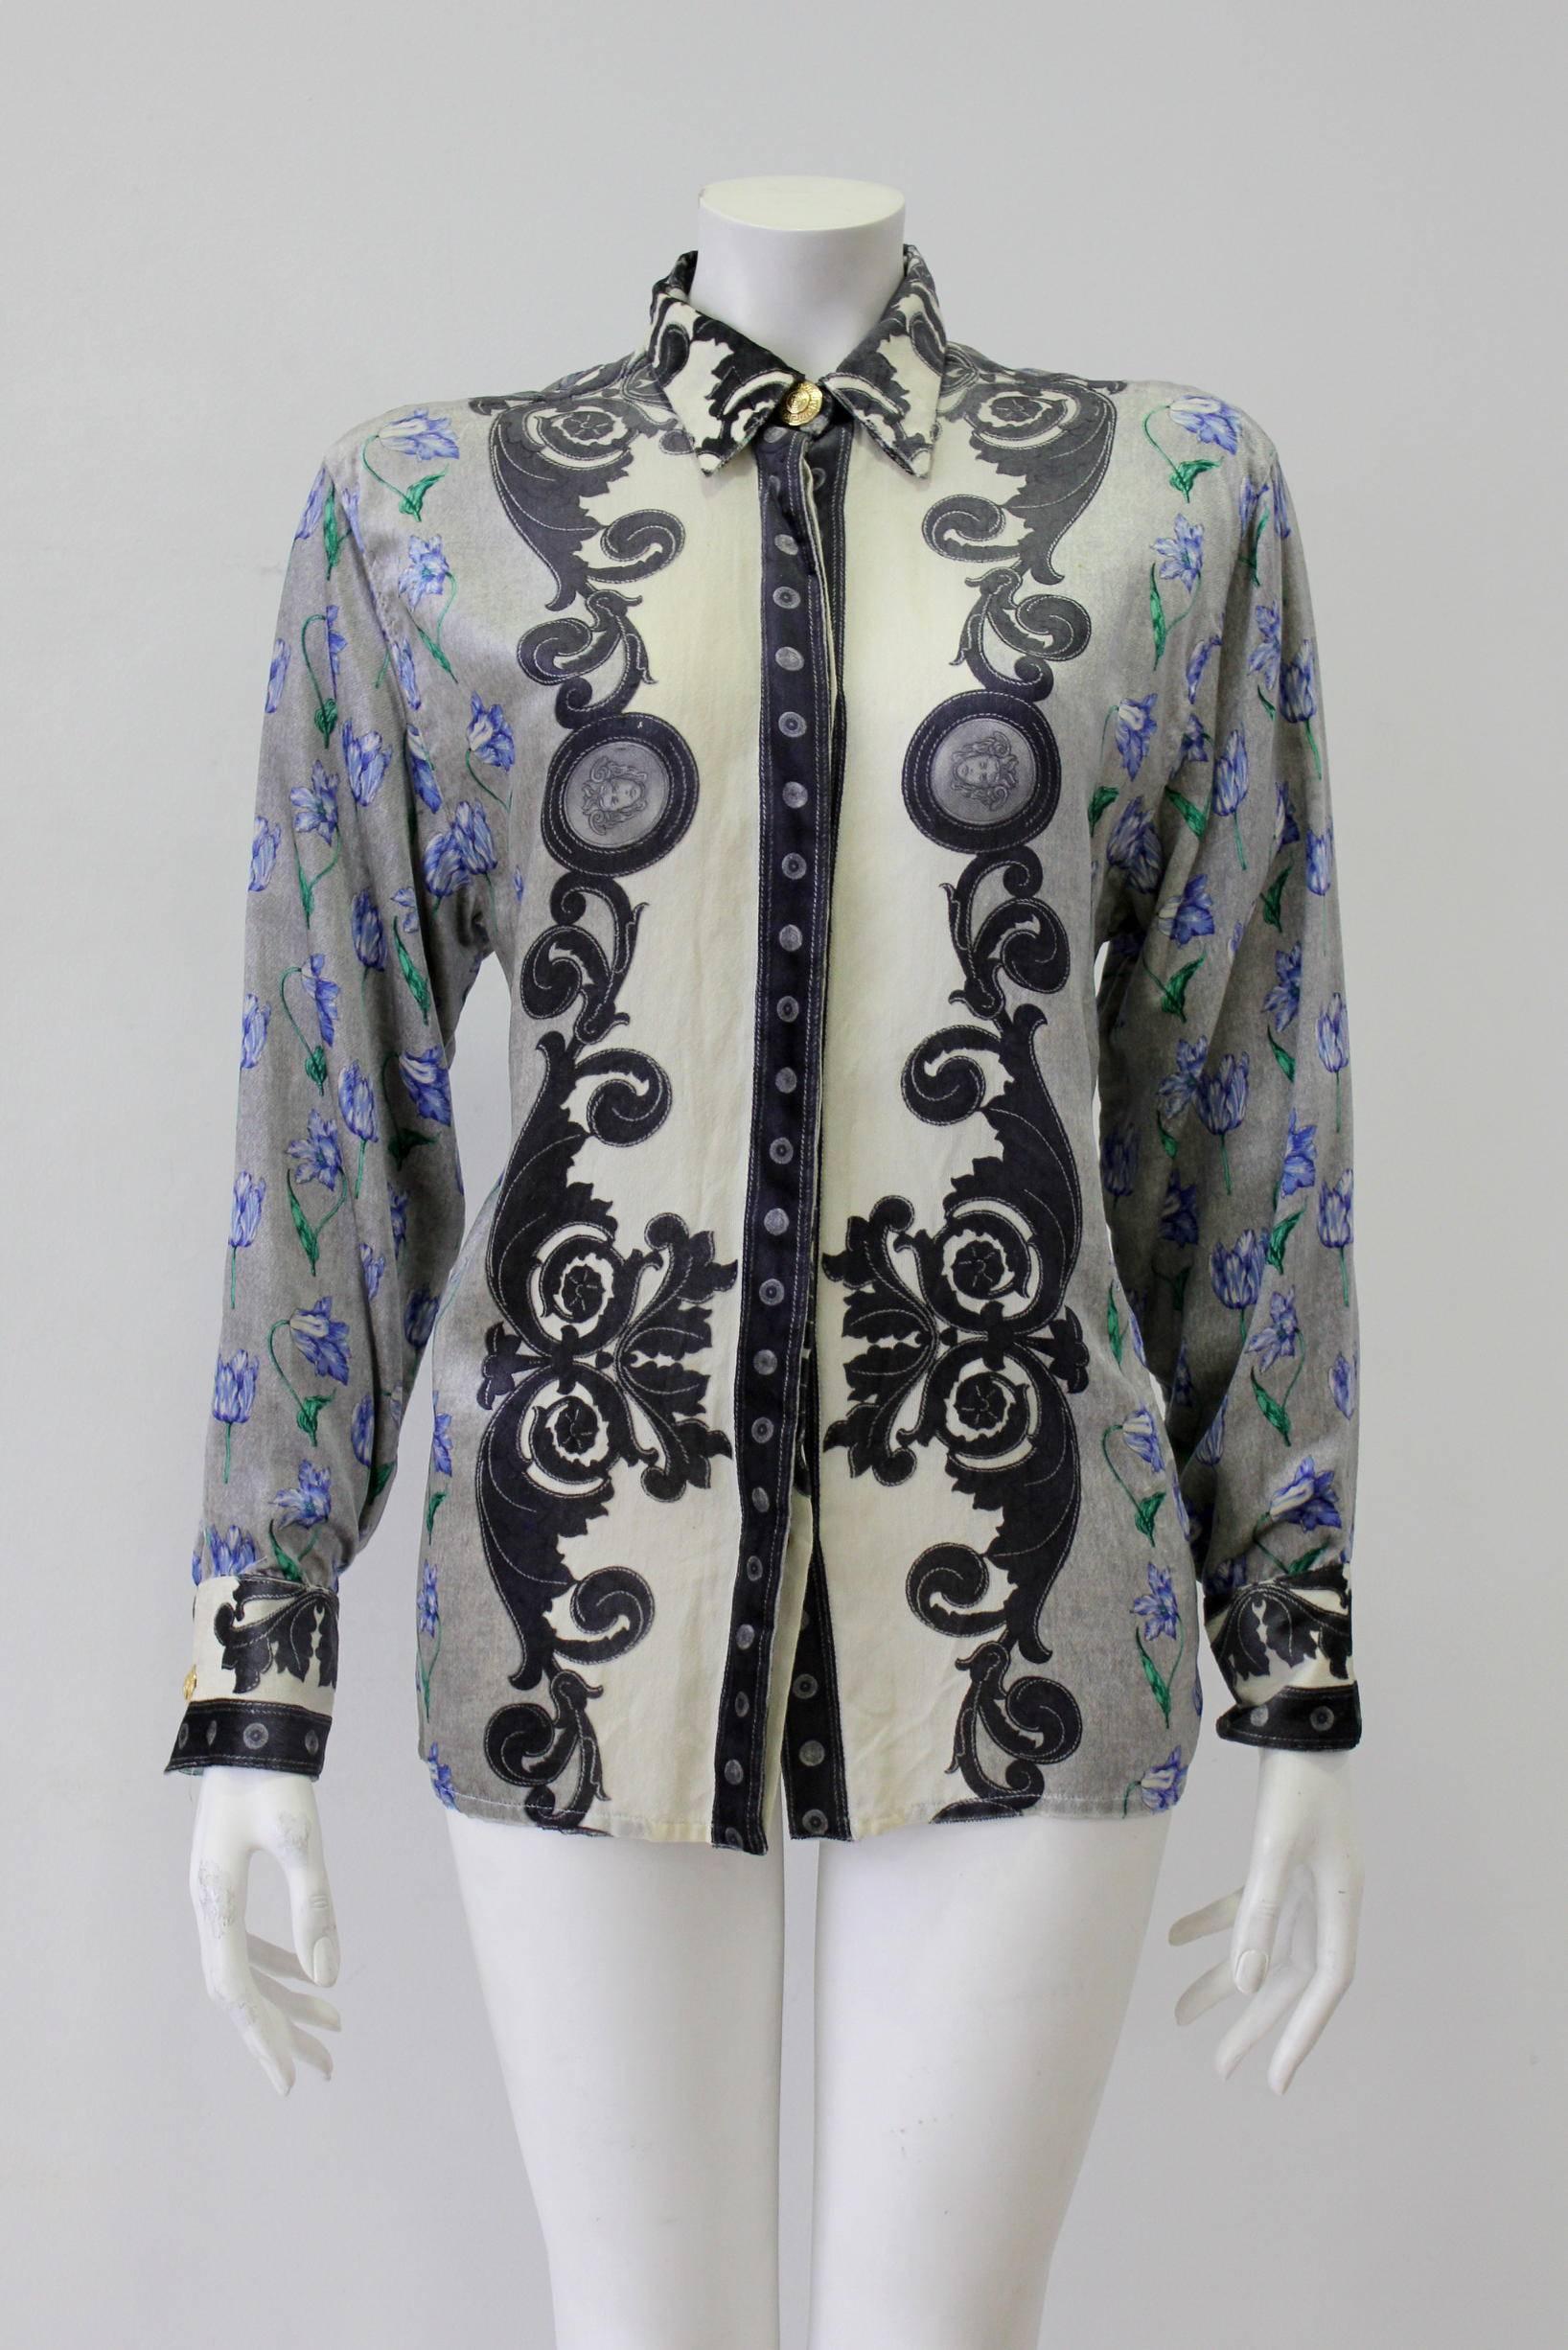 Important Gianni Versace Couture Baroque Print Velvet Shirt featuring Iconic Gold Medusa Greek Key Design Buttons